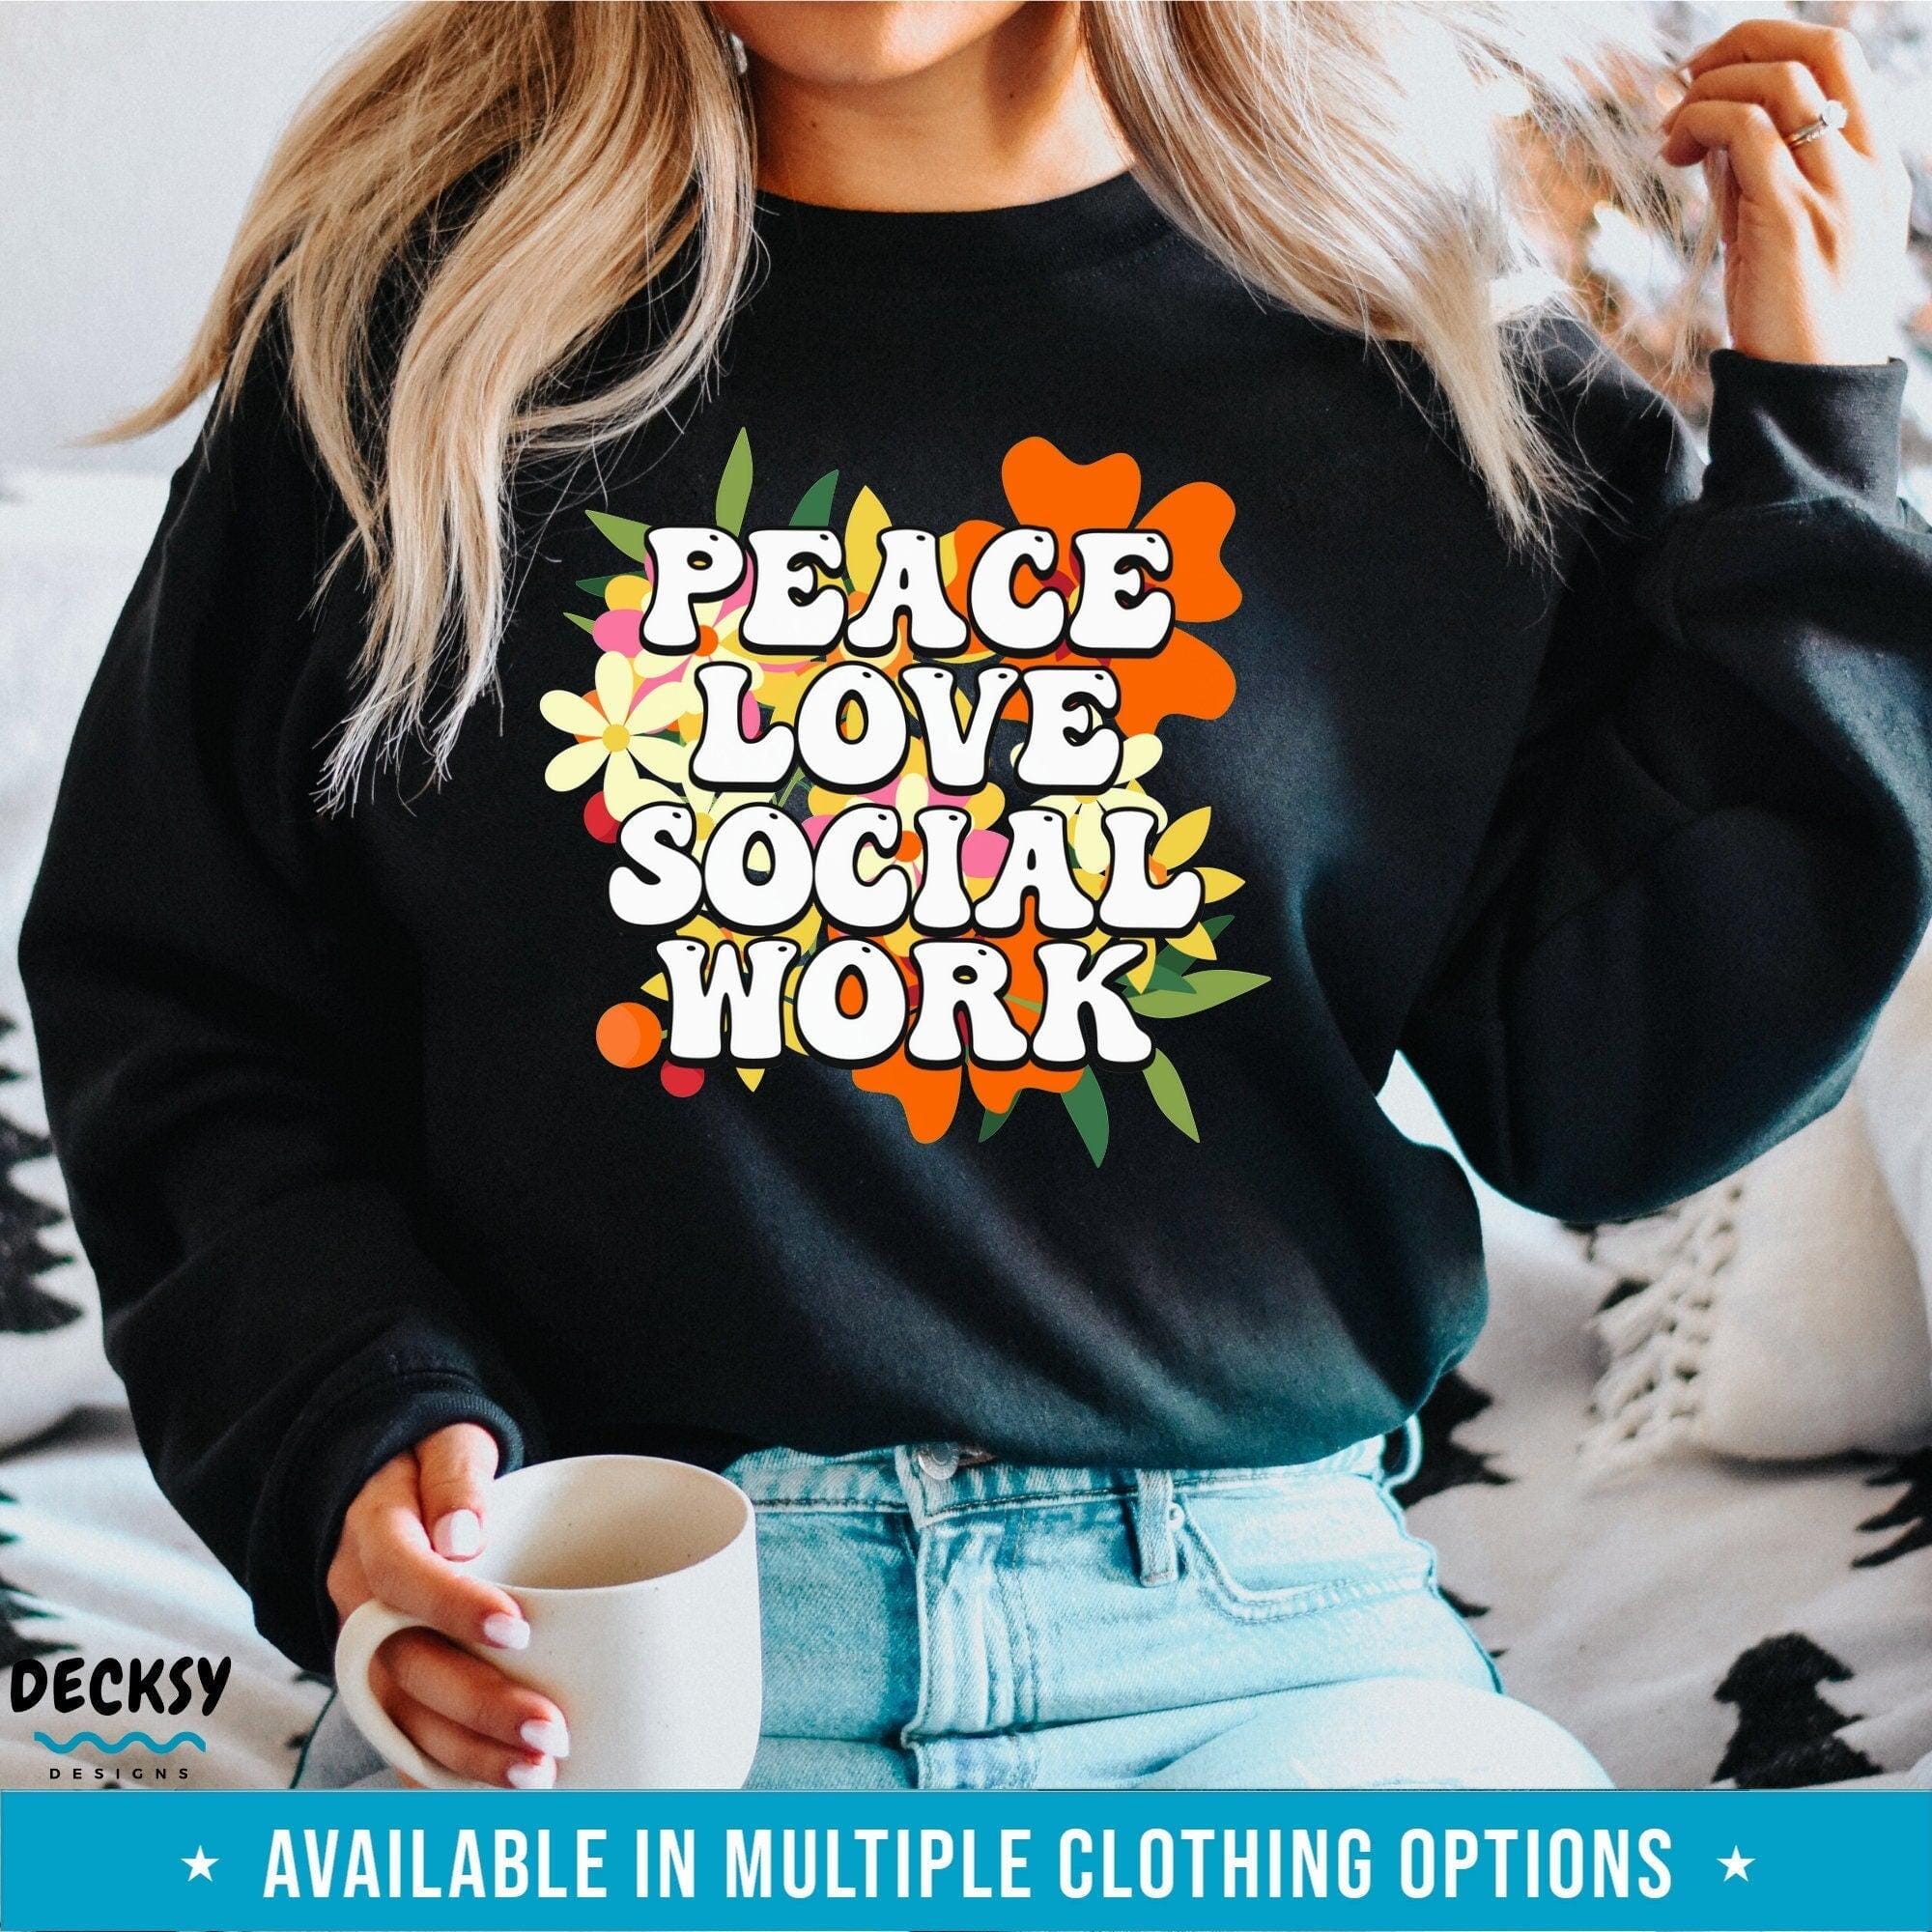 Inspirational Social Work Shirt, Gift For Social Worker-Clothing:Gender-Neutral Adult Clothing:Tops & Tees:T-shirts:Graphic Tees-DecksyDesigns